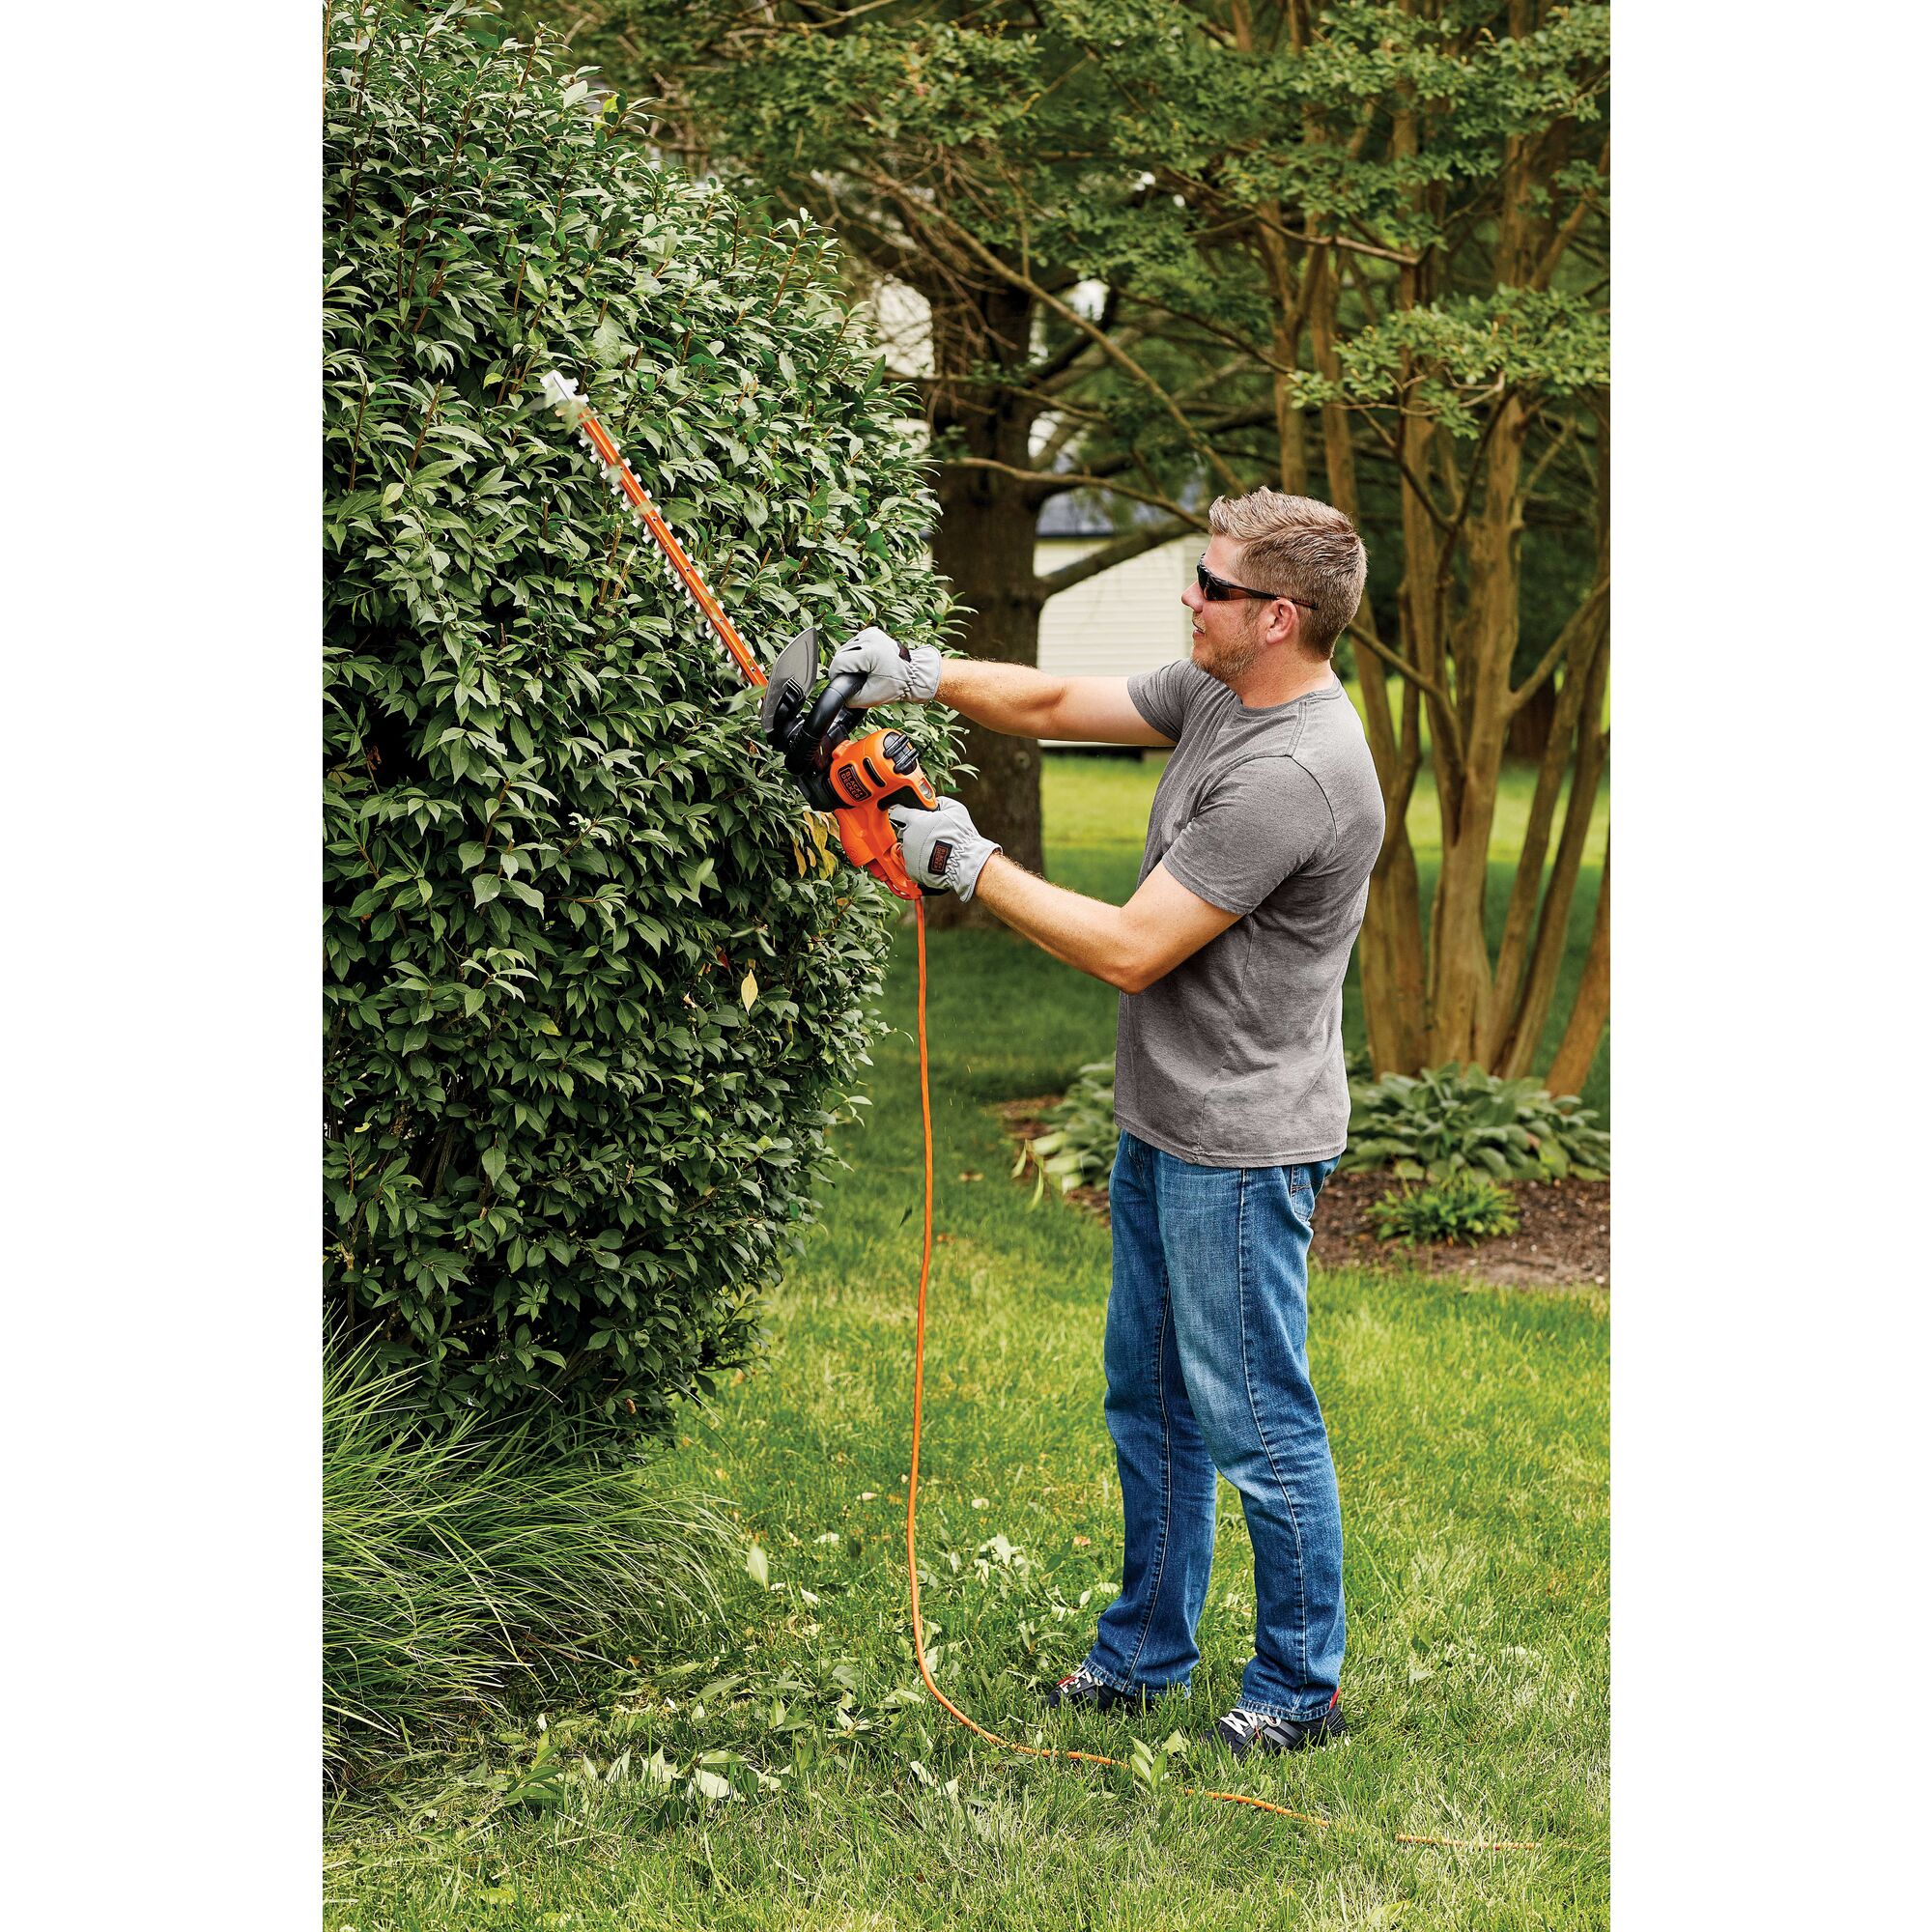 20 inch SAW BLADE Electric Hedge Trimmer being used by person to trim hedge outdoors.